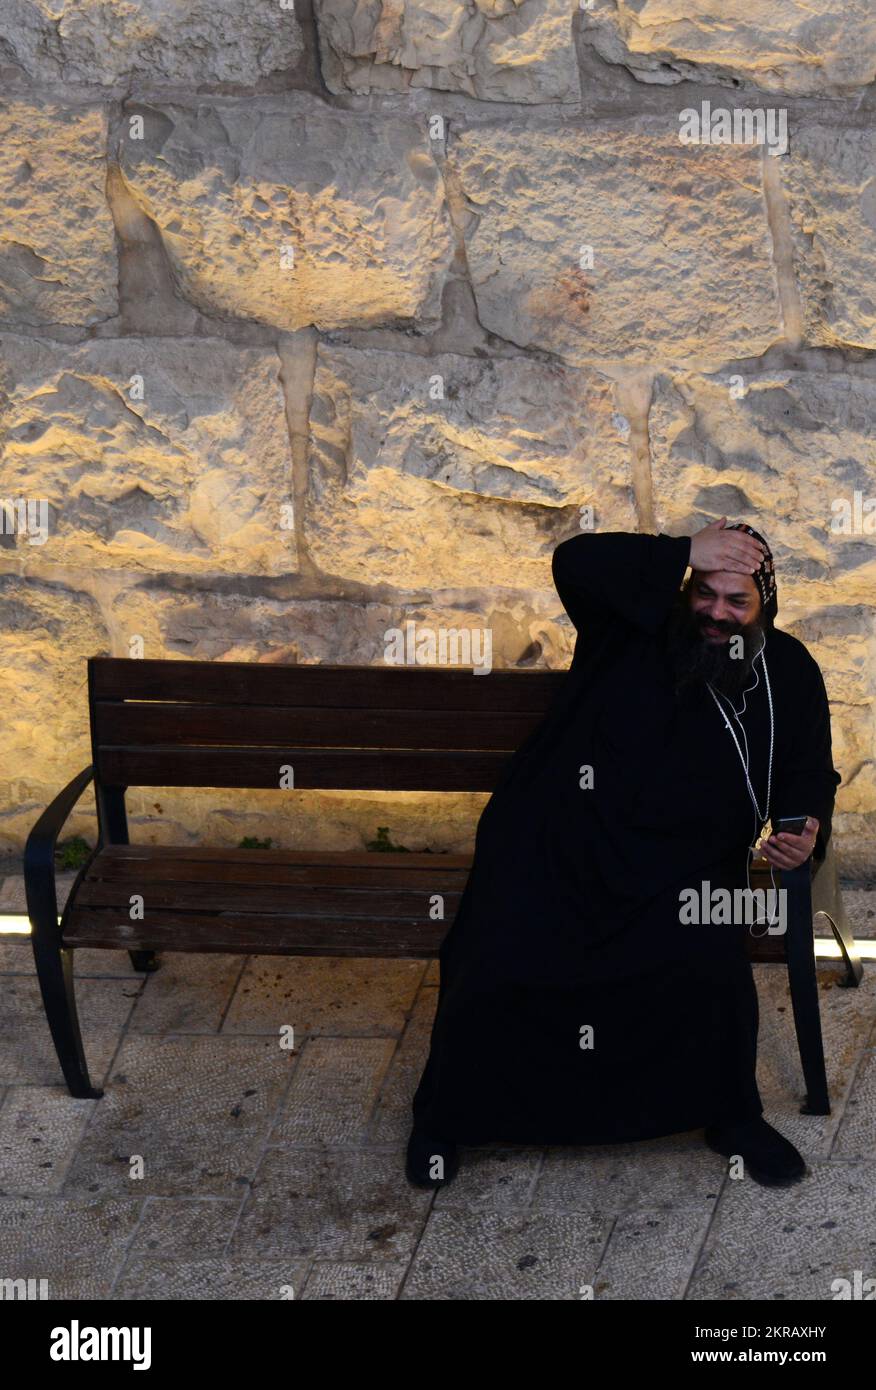 A Coptic priest using his smartphone by the New Gate, Old City of Jerusalem, Israel. Stock Photo